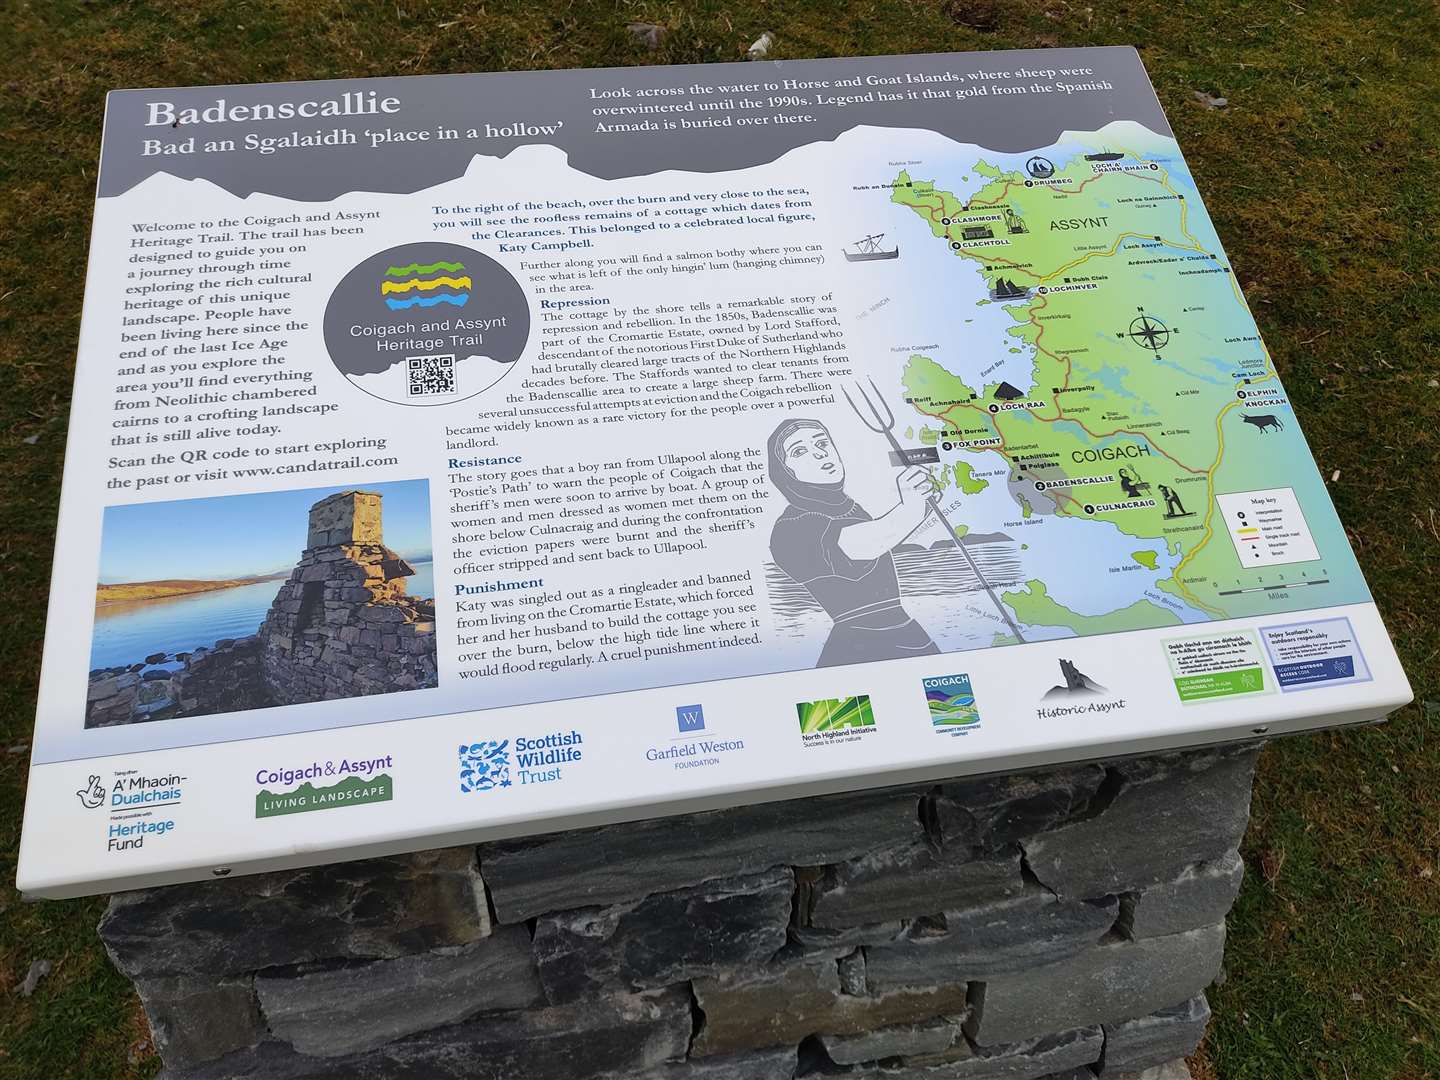 An information panel on the trail at Badenscallie.